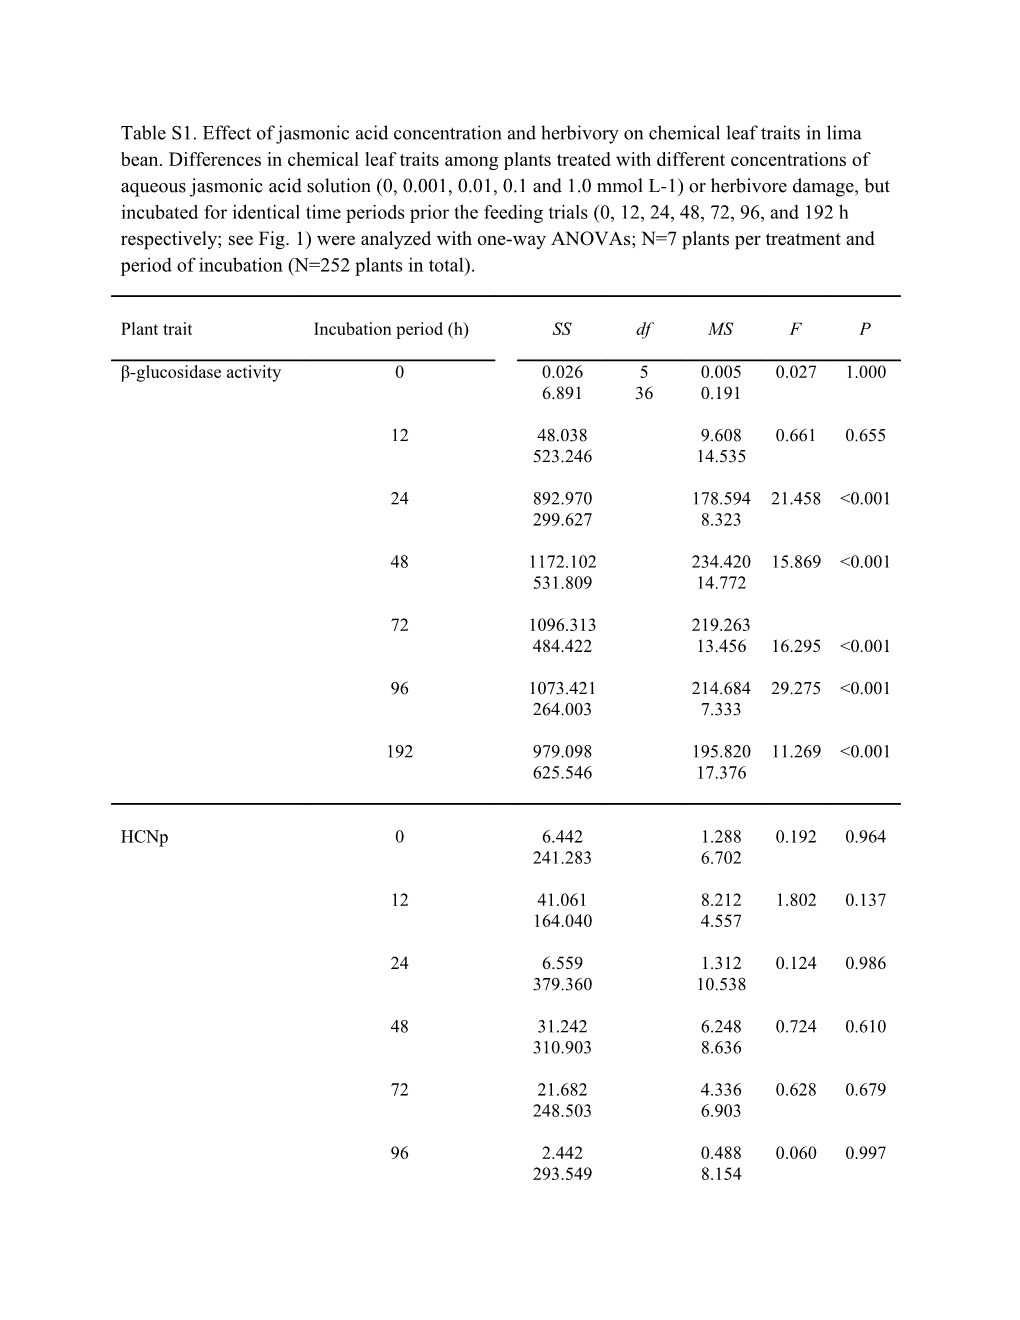 Table S1. Effect of Jasmonic Acid Concentration and Herbivory on Chemical Leaf Traits In